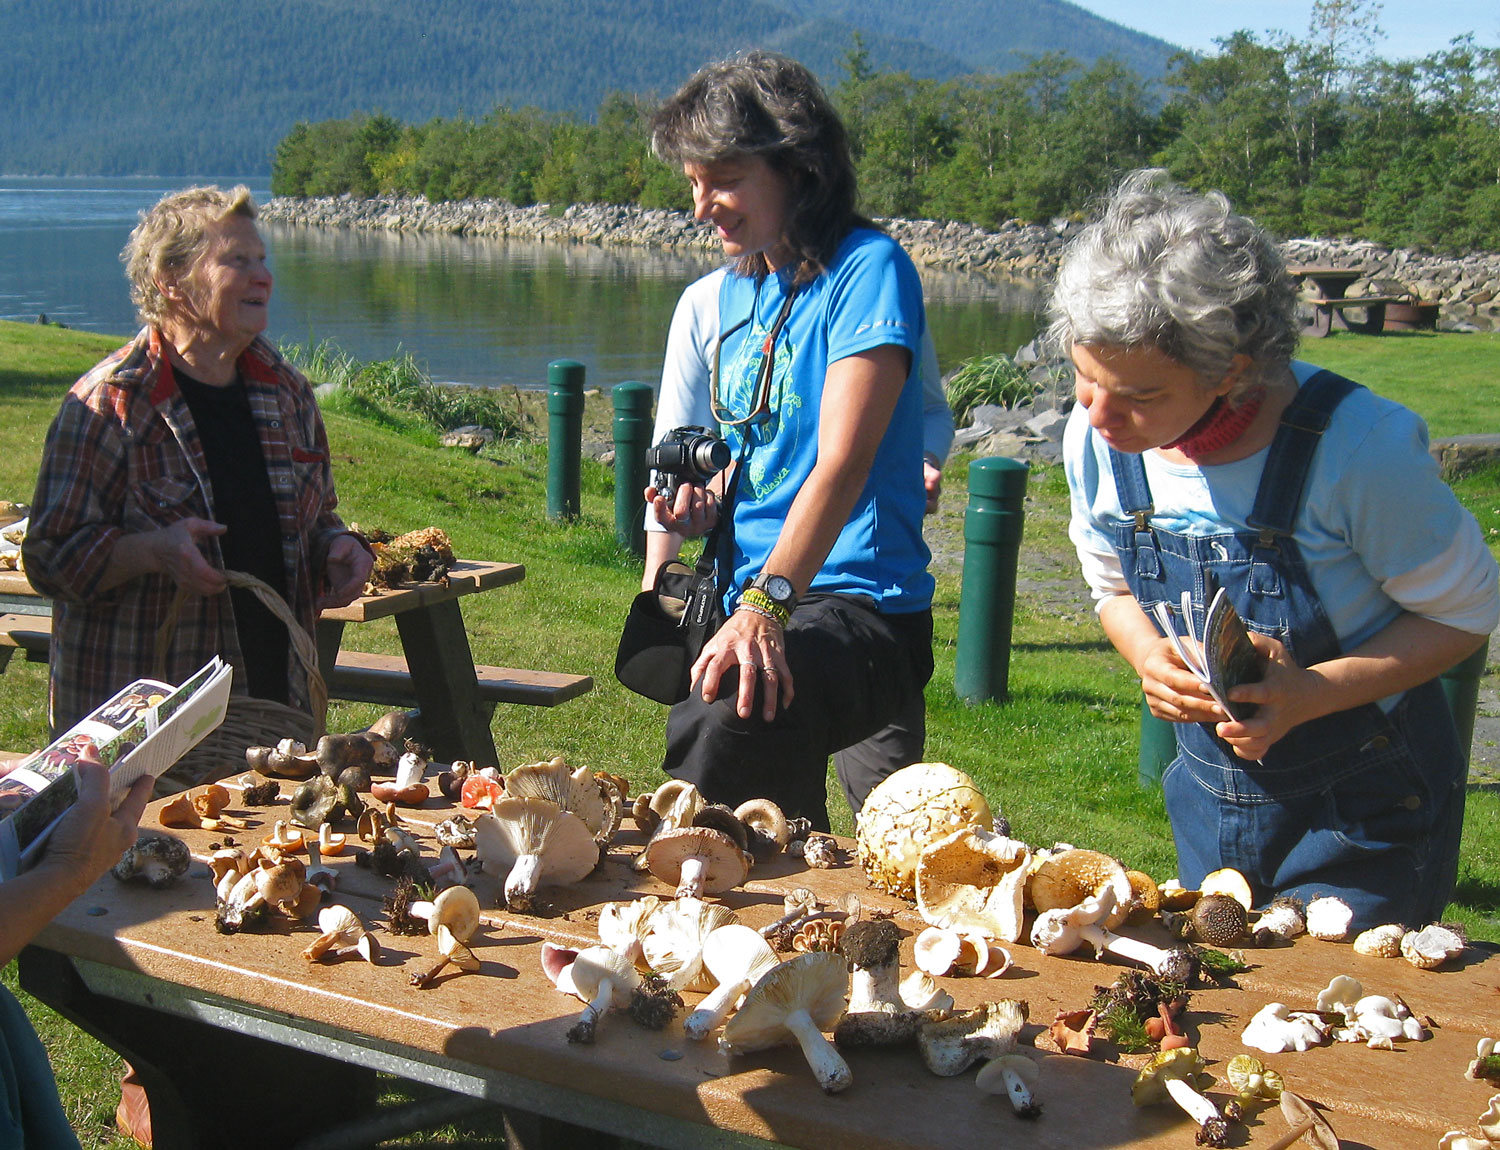 Karen Dillman (center) is a lichen expert and a Tongass National Forest ecologist . She is discussing good edibles with Elody while Katherine studies the non-edible Amanitas on the table.